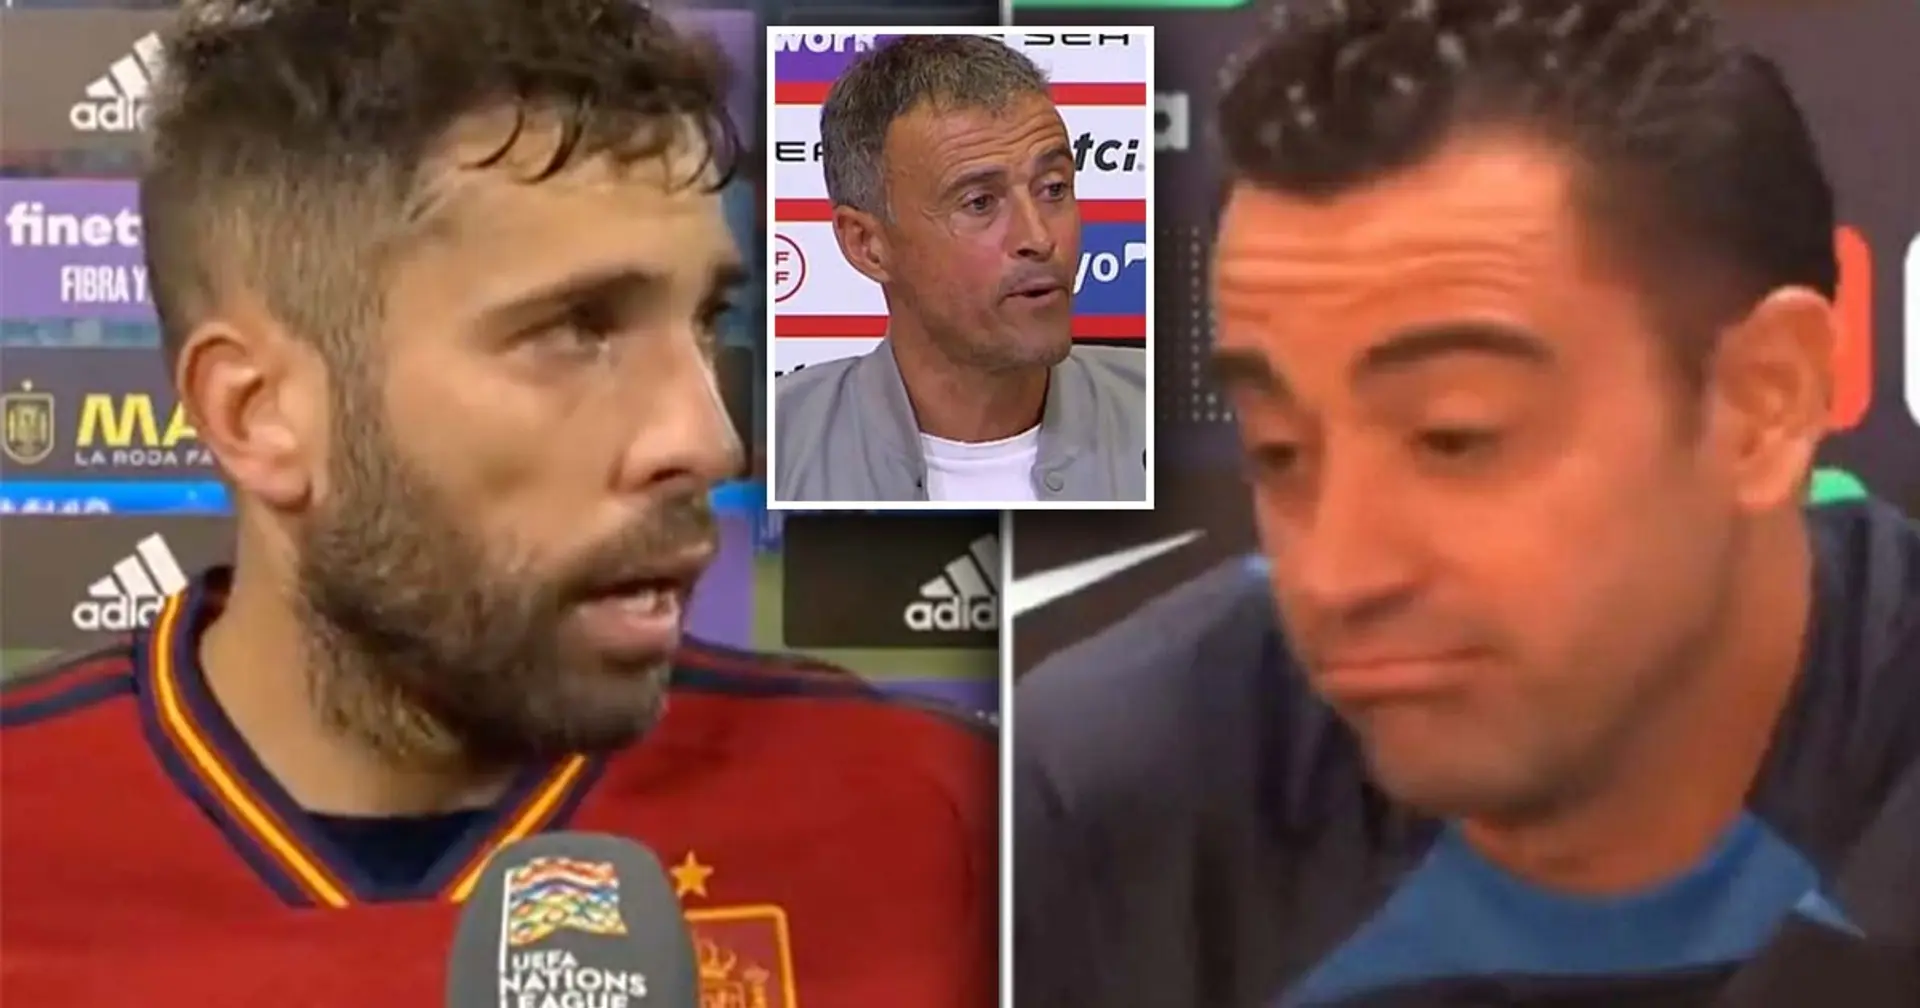 'I want to thank Luis Enrique for trusting me': Jordi Alba possibly aims dig at Xavi after Spain match